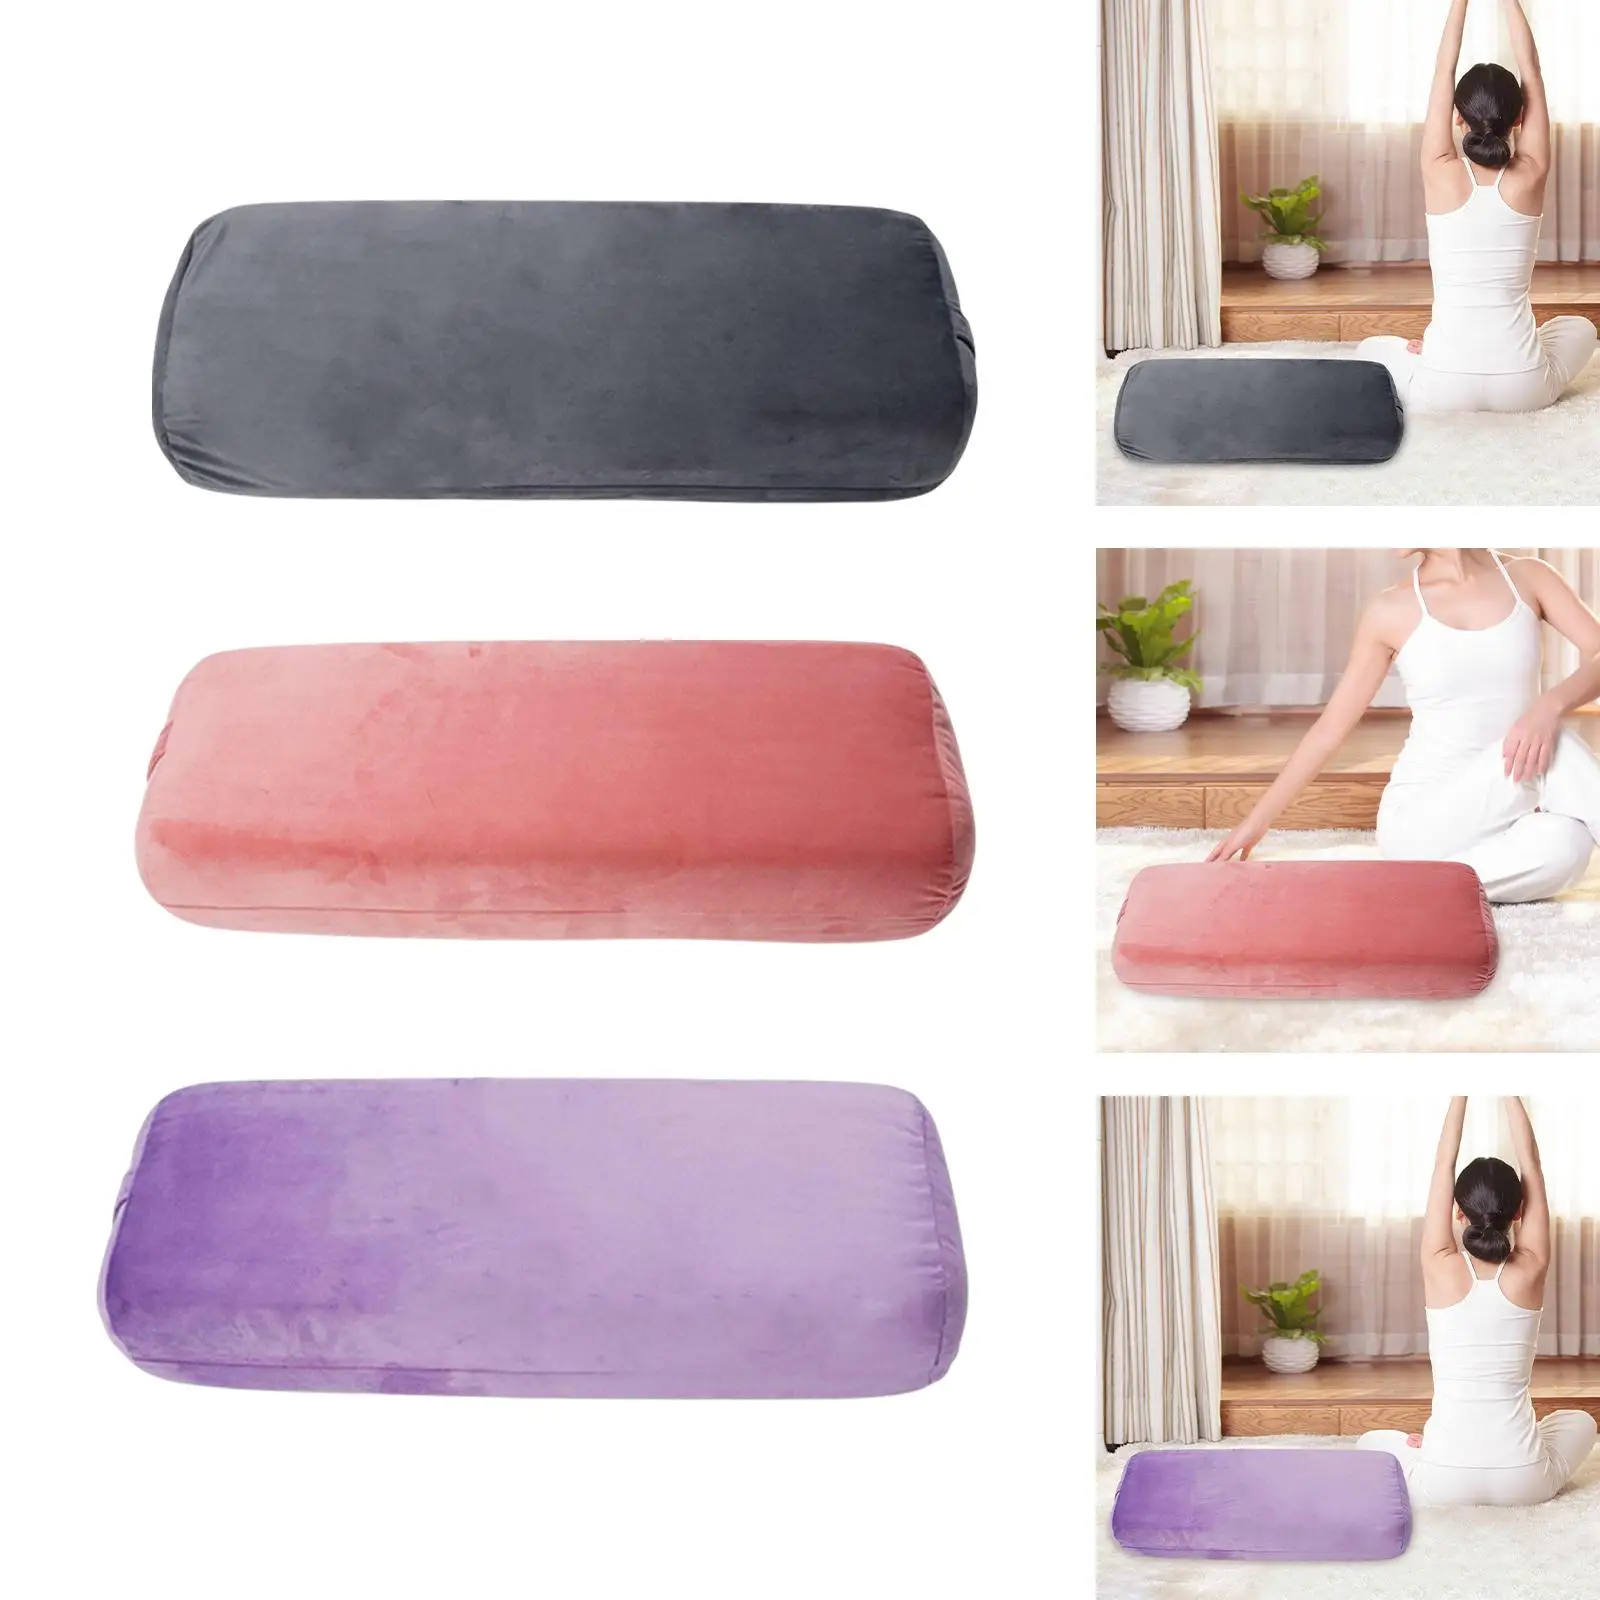 Yoga Bolster Pillow Removable Washable Cover Comfortable Sponge Meditation Cushion Support Pillow for Legs Soft Support